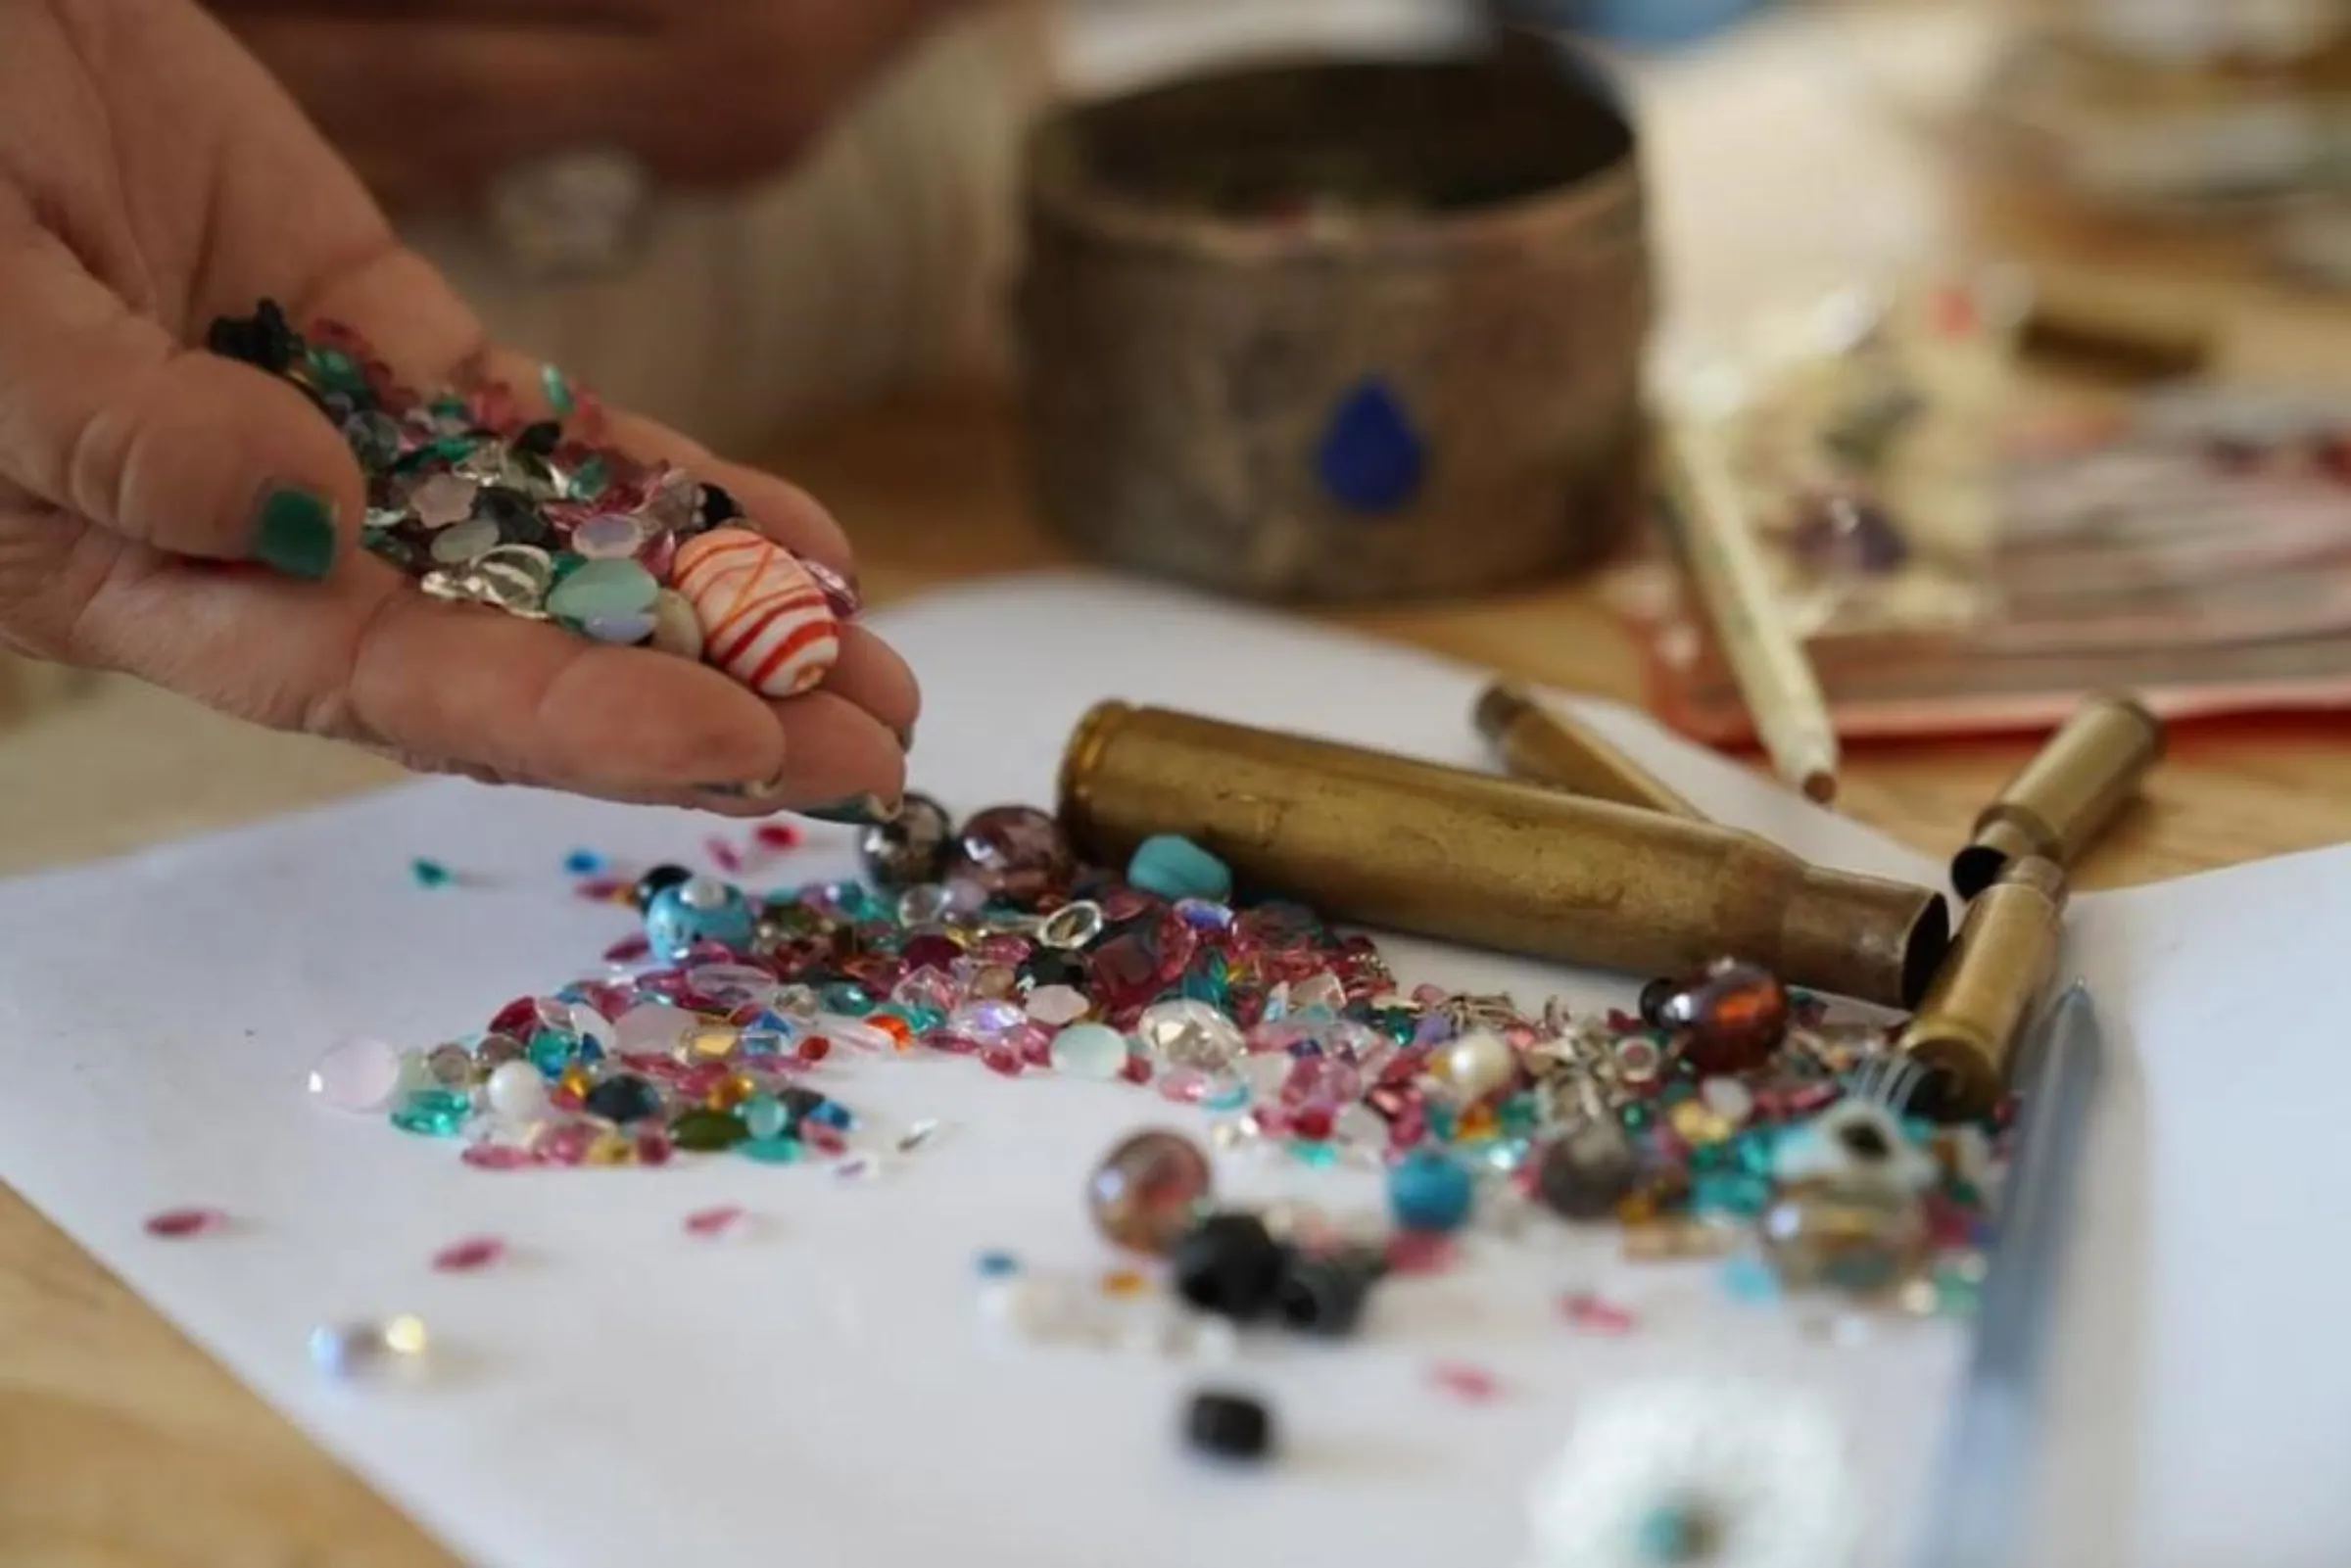 Jewels, beads and bullet casings are pictured at a handicraft centre in Kabul run by Laila Haidari in 2022. Handout/Thomson Reuters Foundation